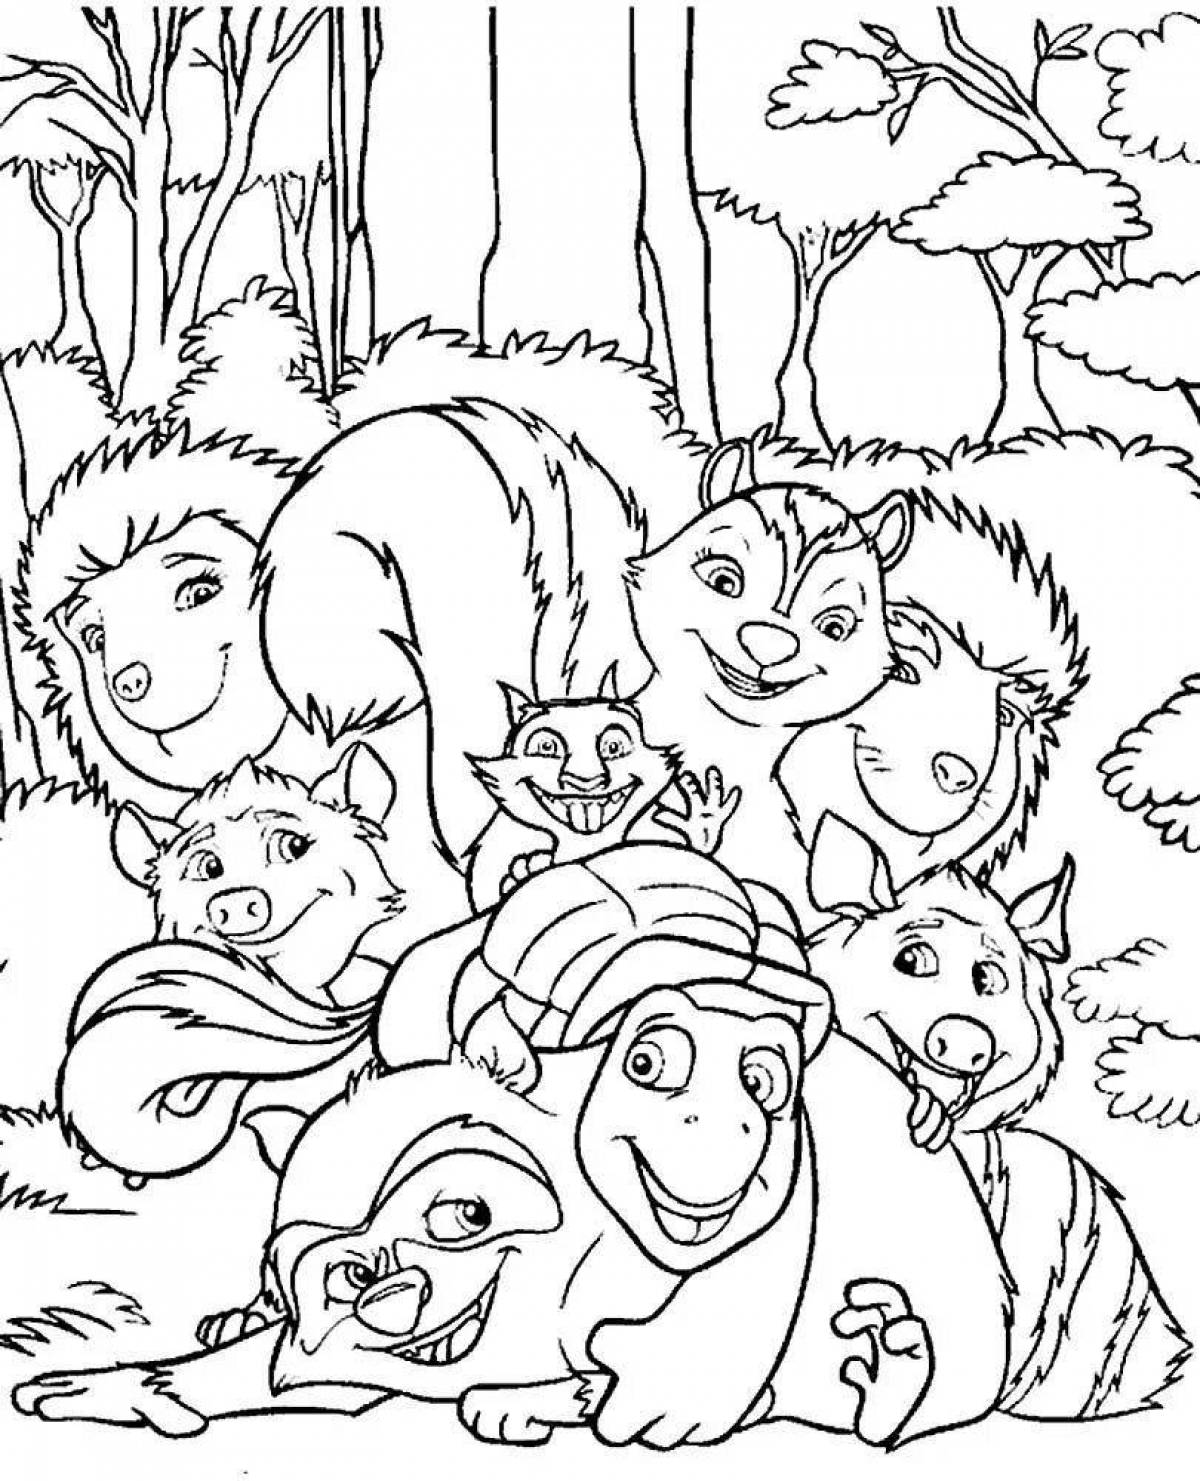 Adorable forest animal coloring page